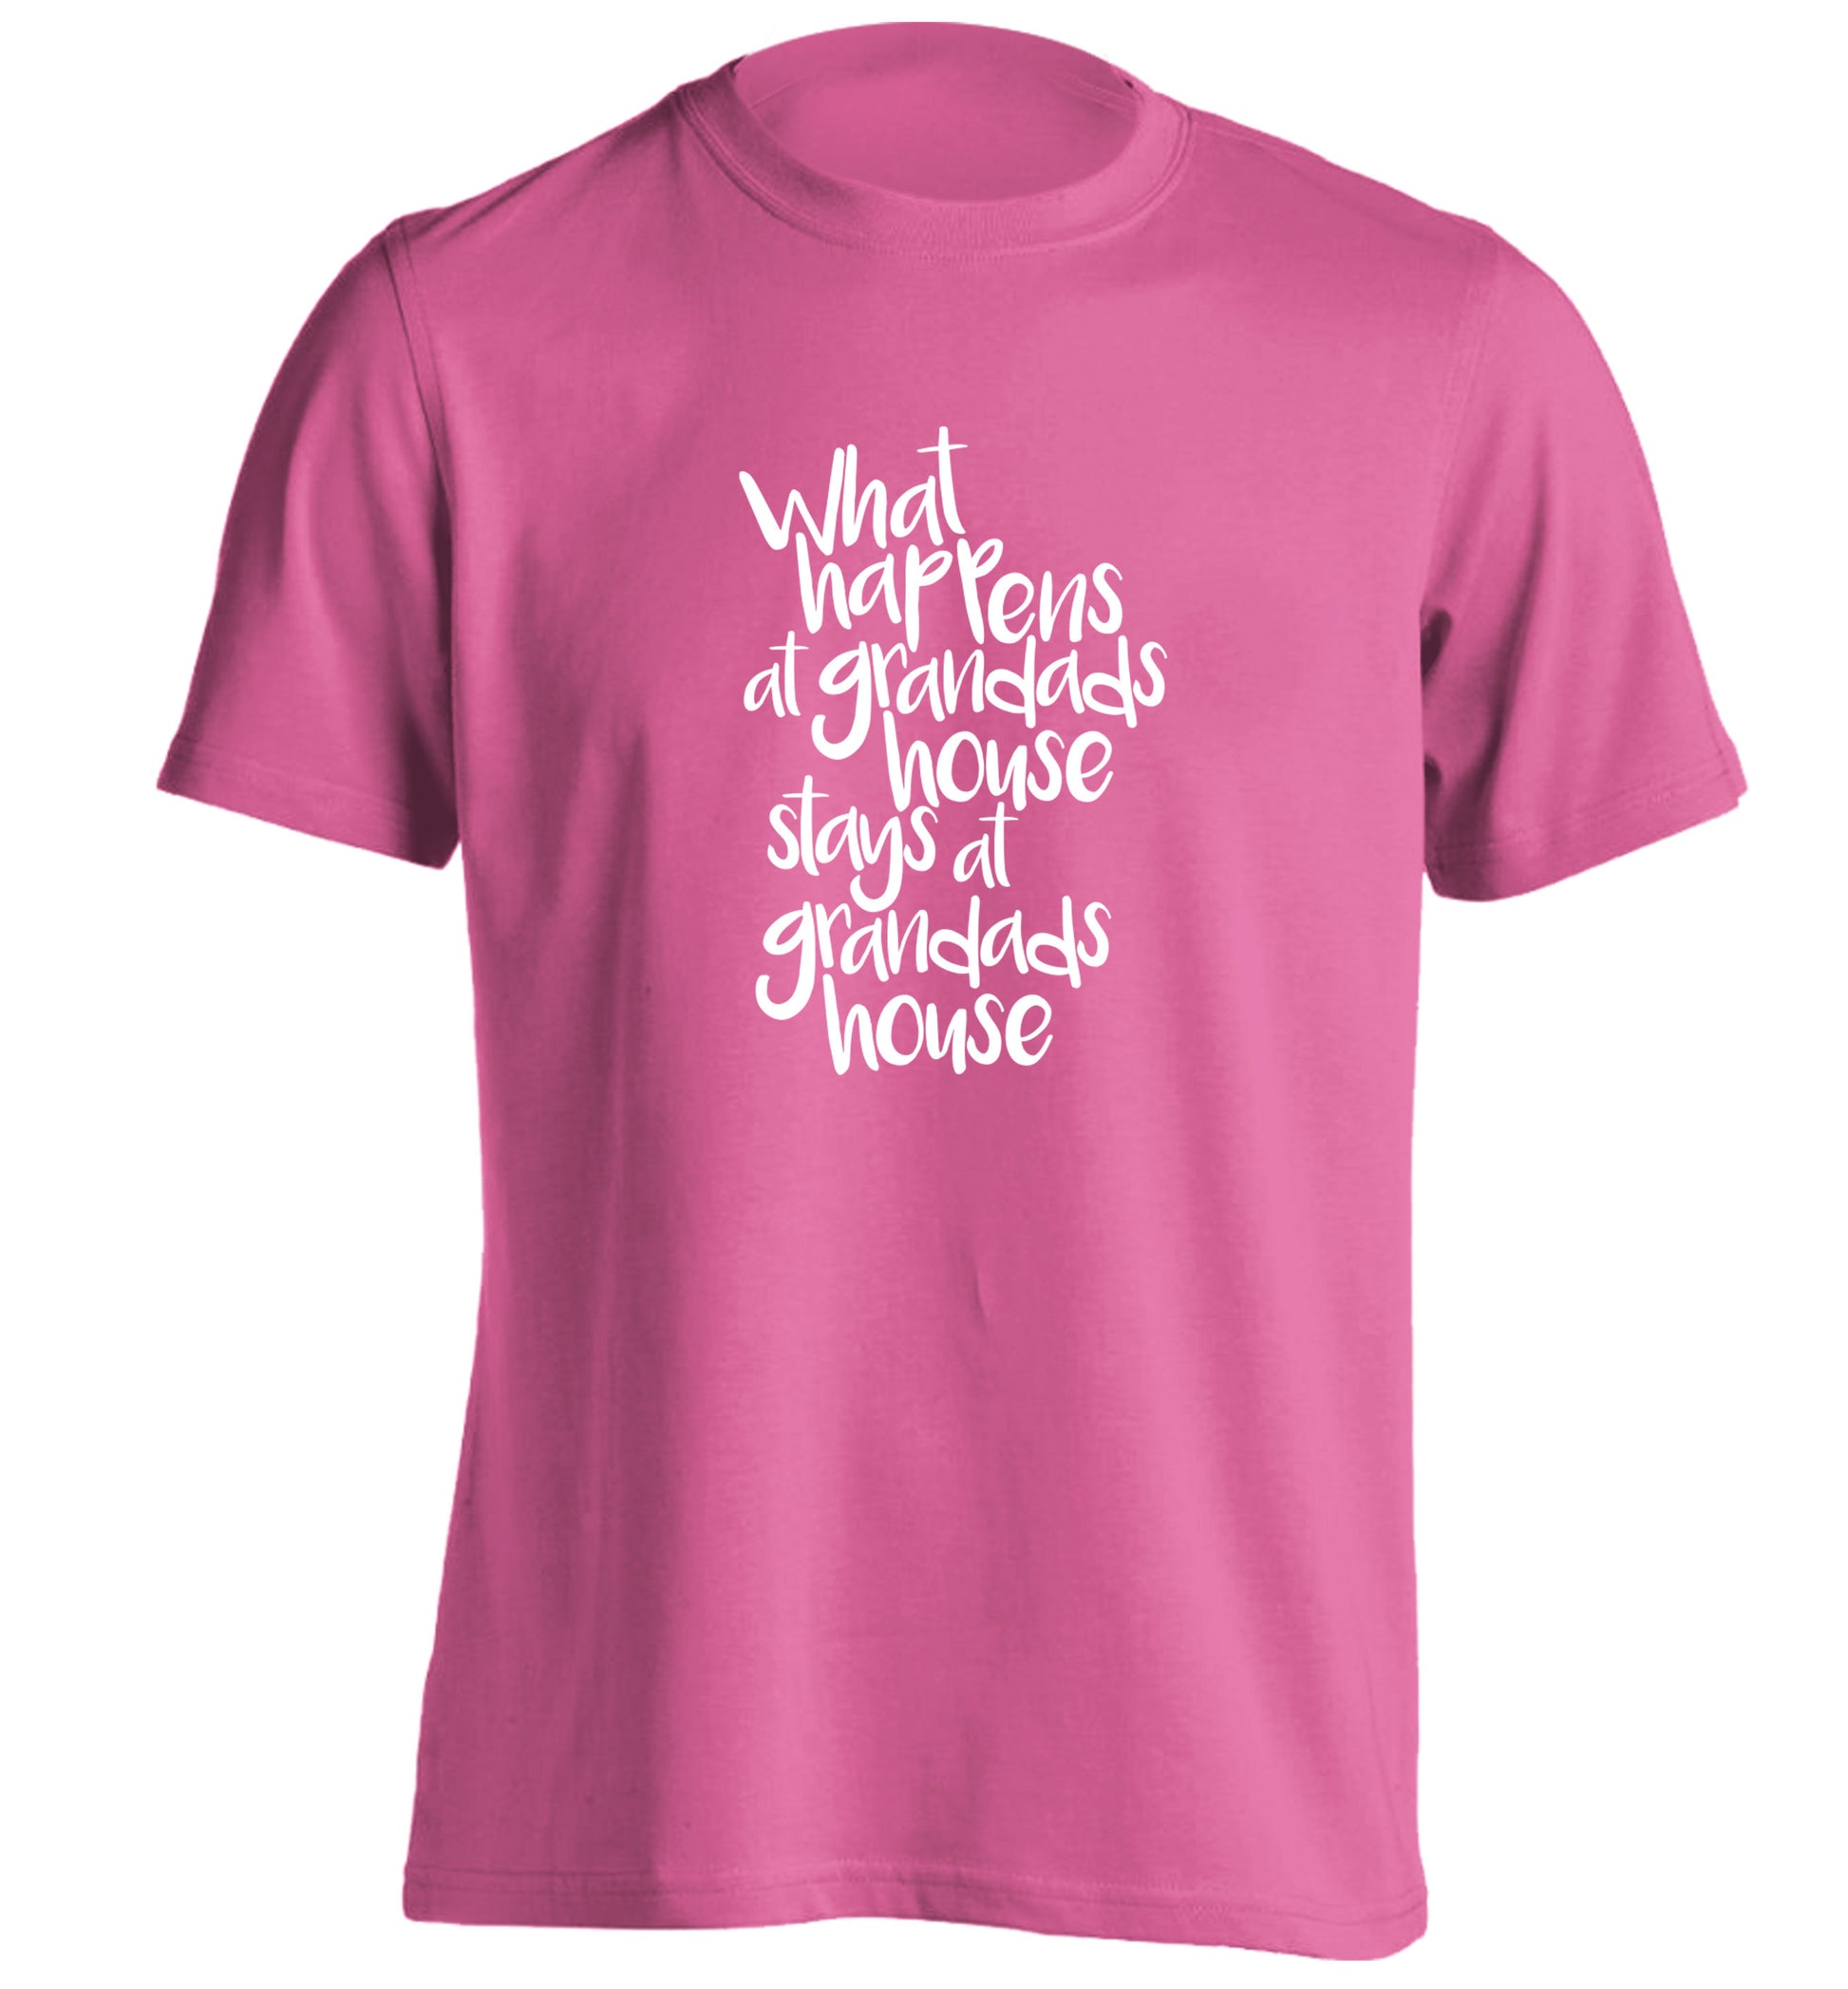 What happens at grandads house stays at grandads house adults unisex pink Tshirt 2XL